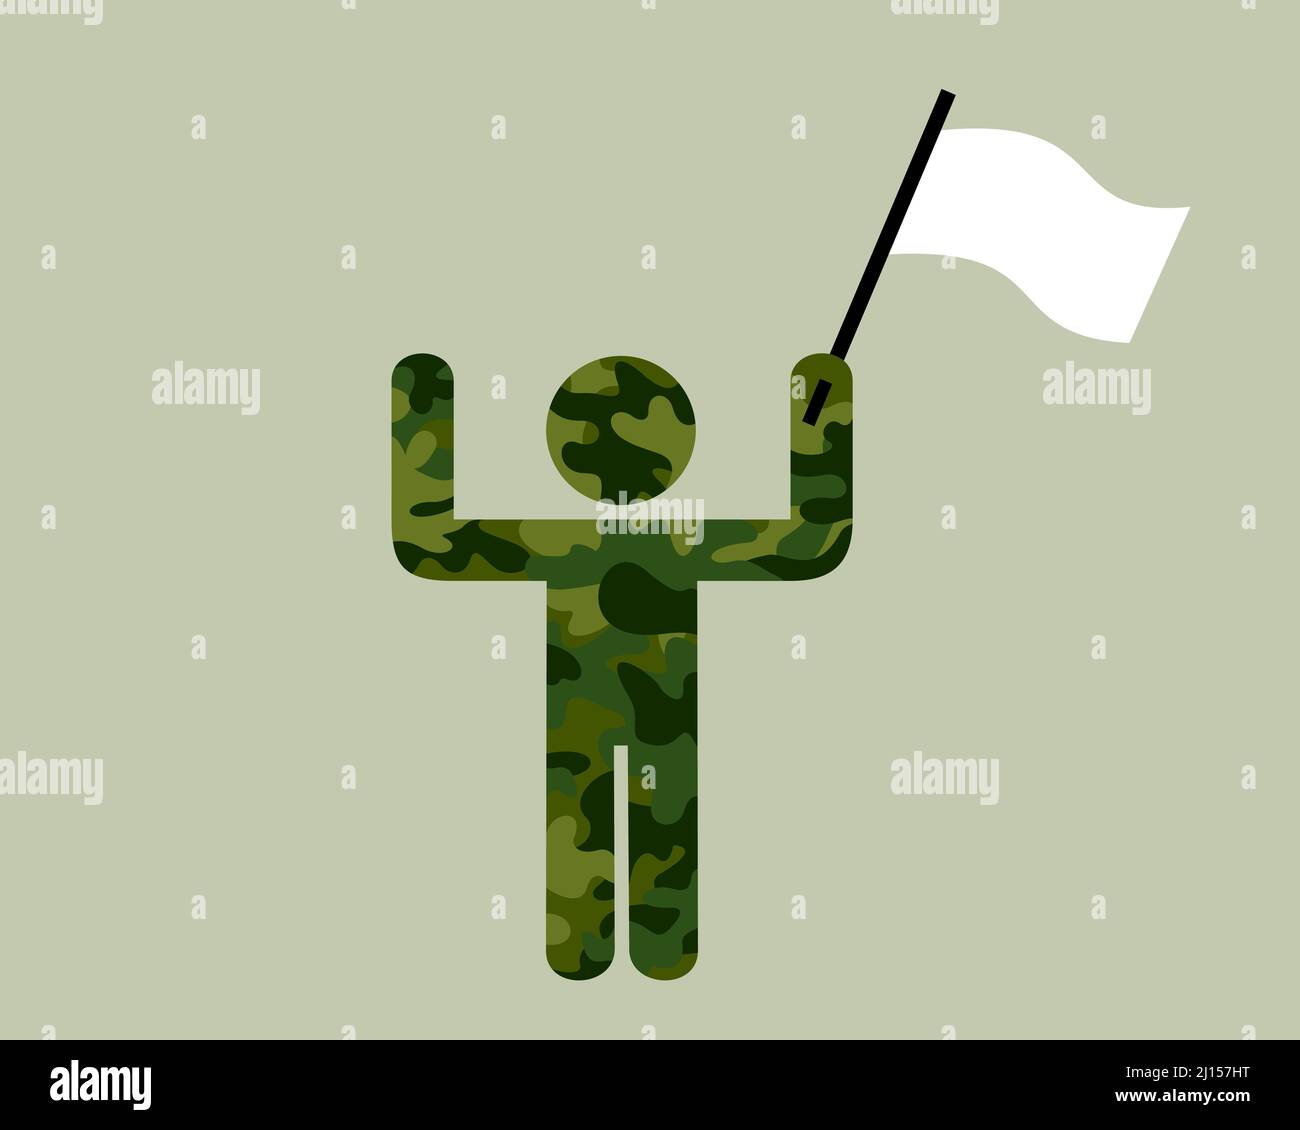 Surrender - soldier, warrior and combatant is giving up, surrendering and capitulating after being defeated. Man in khaki green is holding white flag. Stock Photo